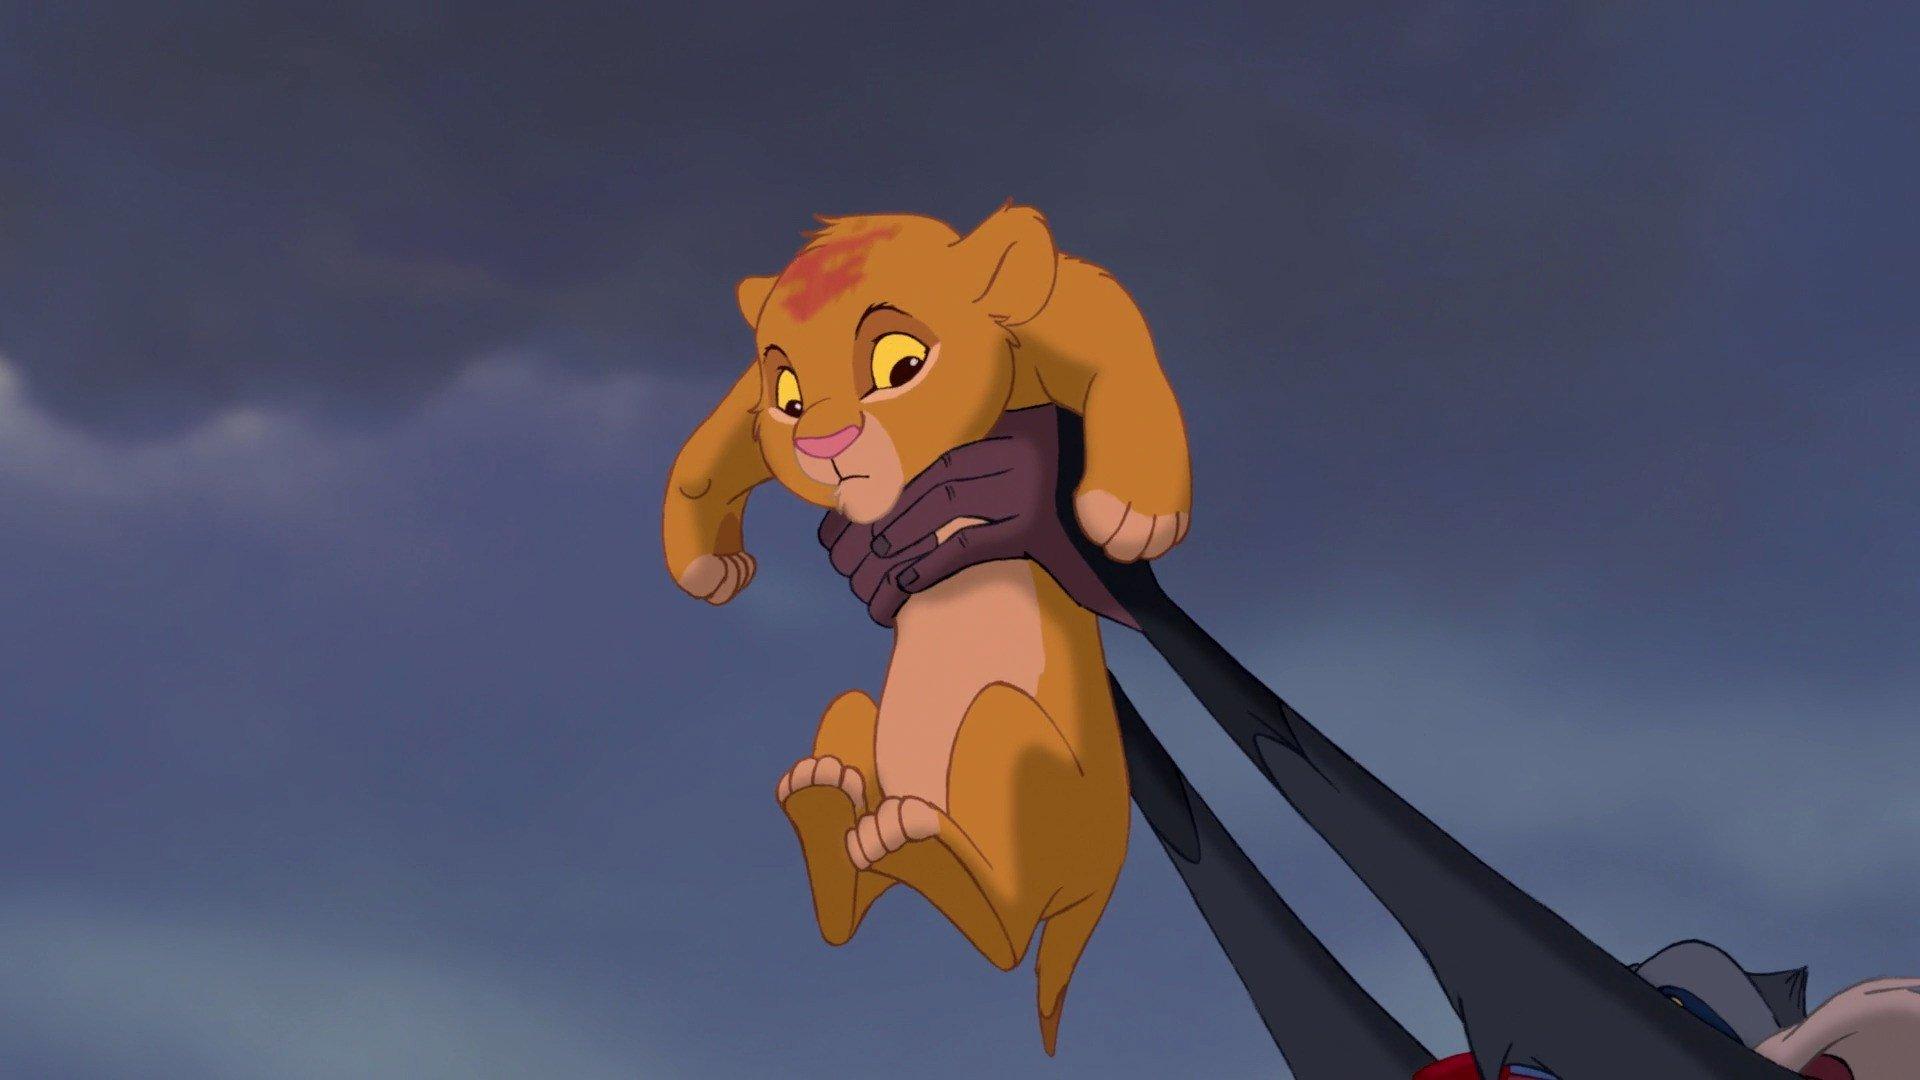 The Lion King remake will be a roaring success